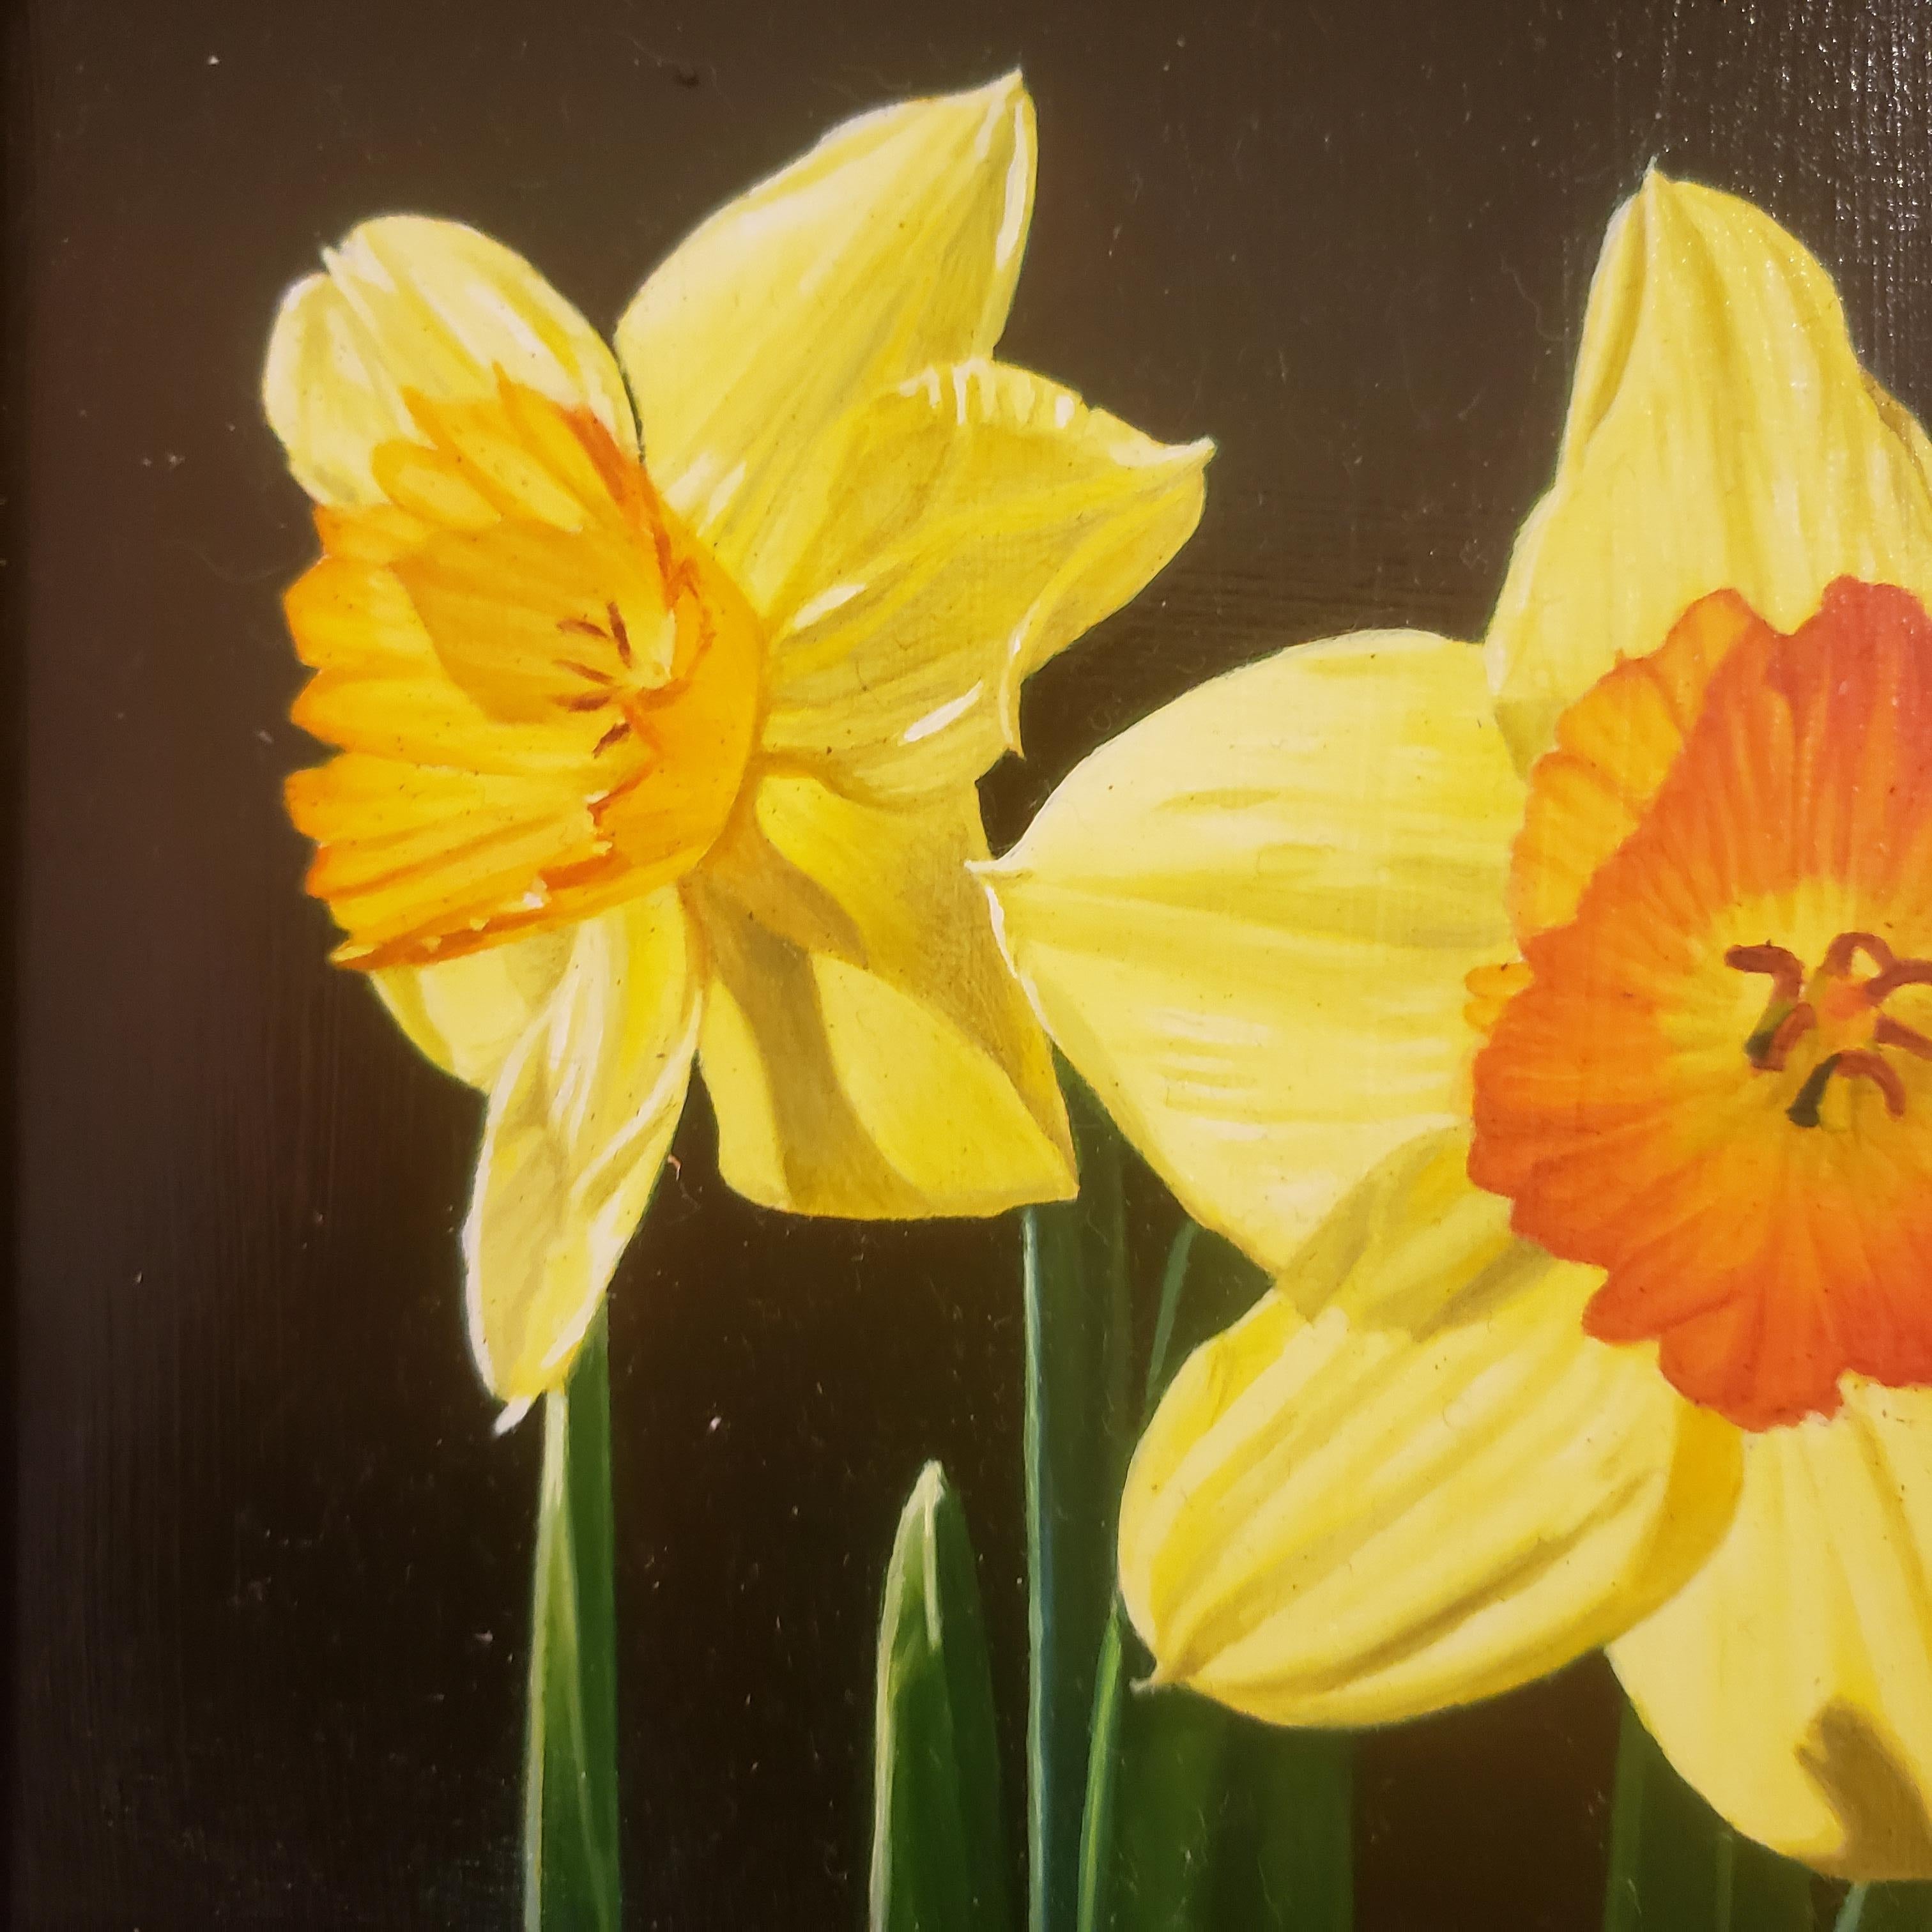 Daffodils is a oil painting done in the style of Realism. It is a still-life oil painting done pleinaire in the Texas countryside near the Texas Hill Country It has a custom made frame.
Realism, in the arts, the accurate, detailed, unembellished